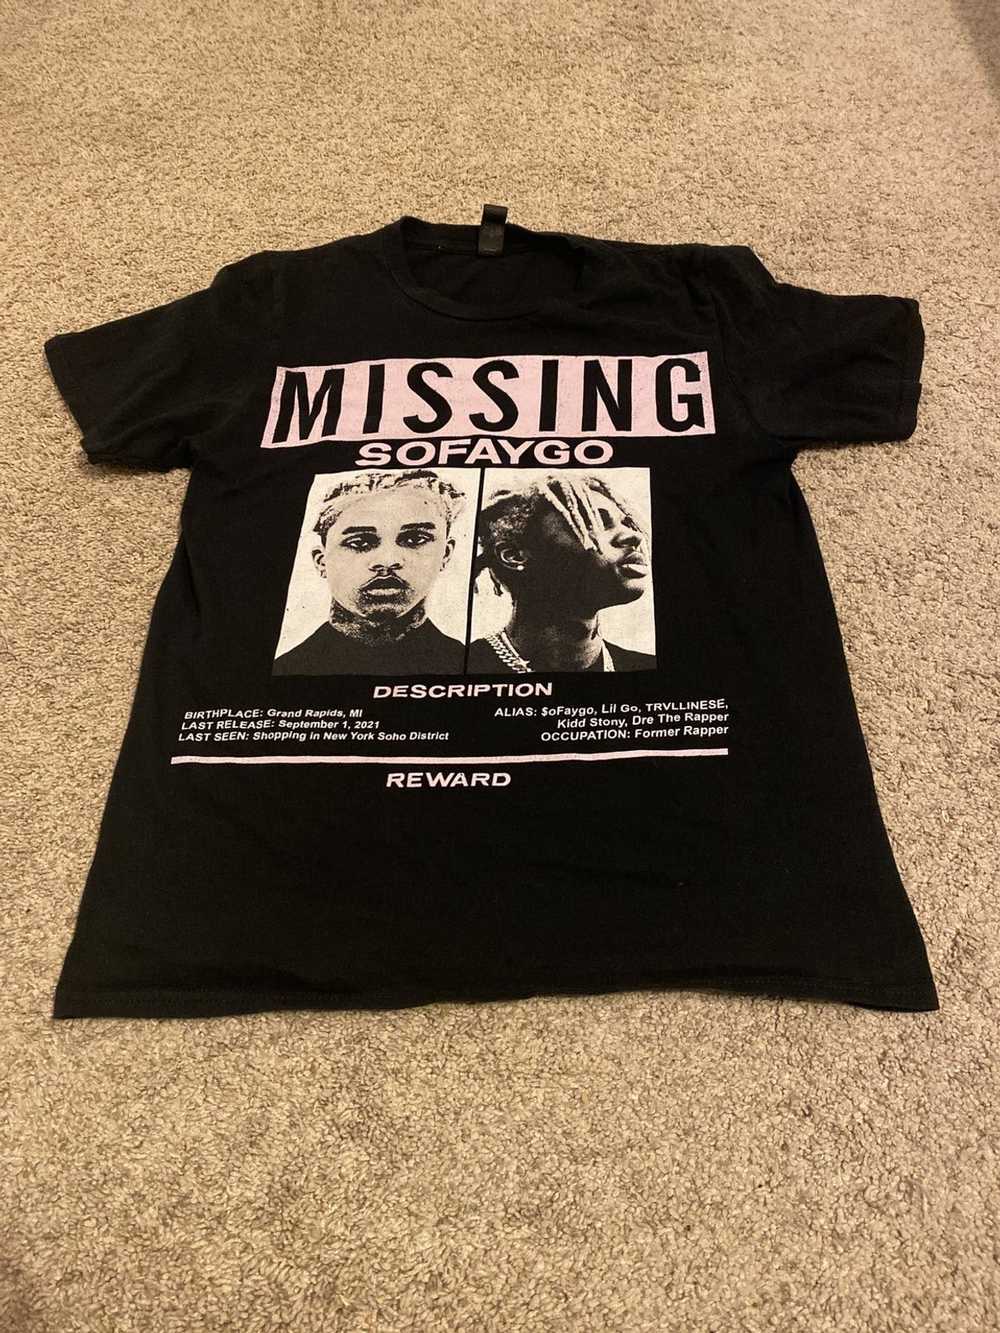 Other × Streetwear × Vintage So Faygo Missing tee - image 1